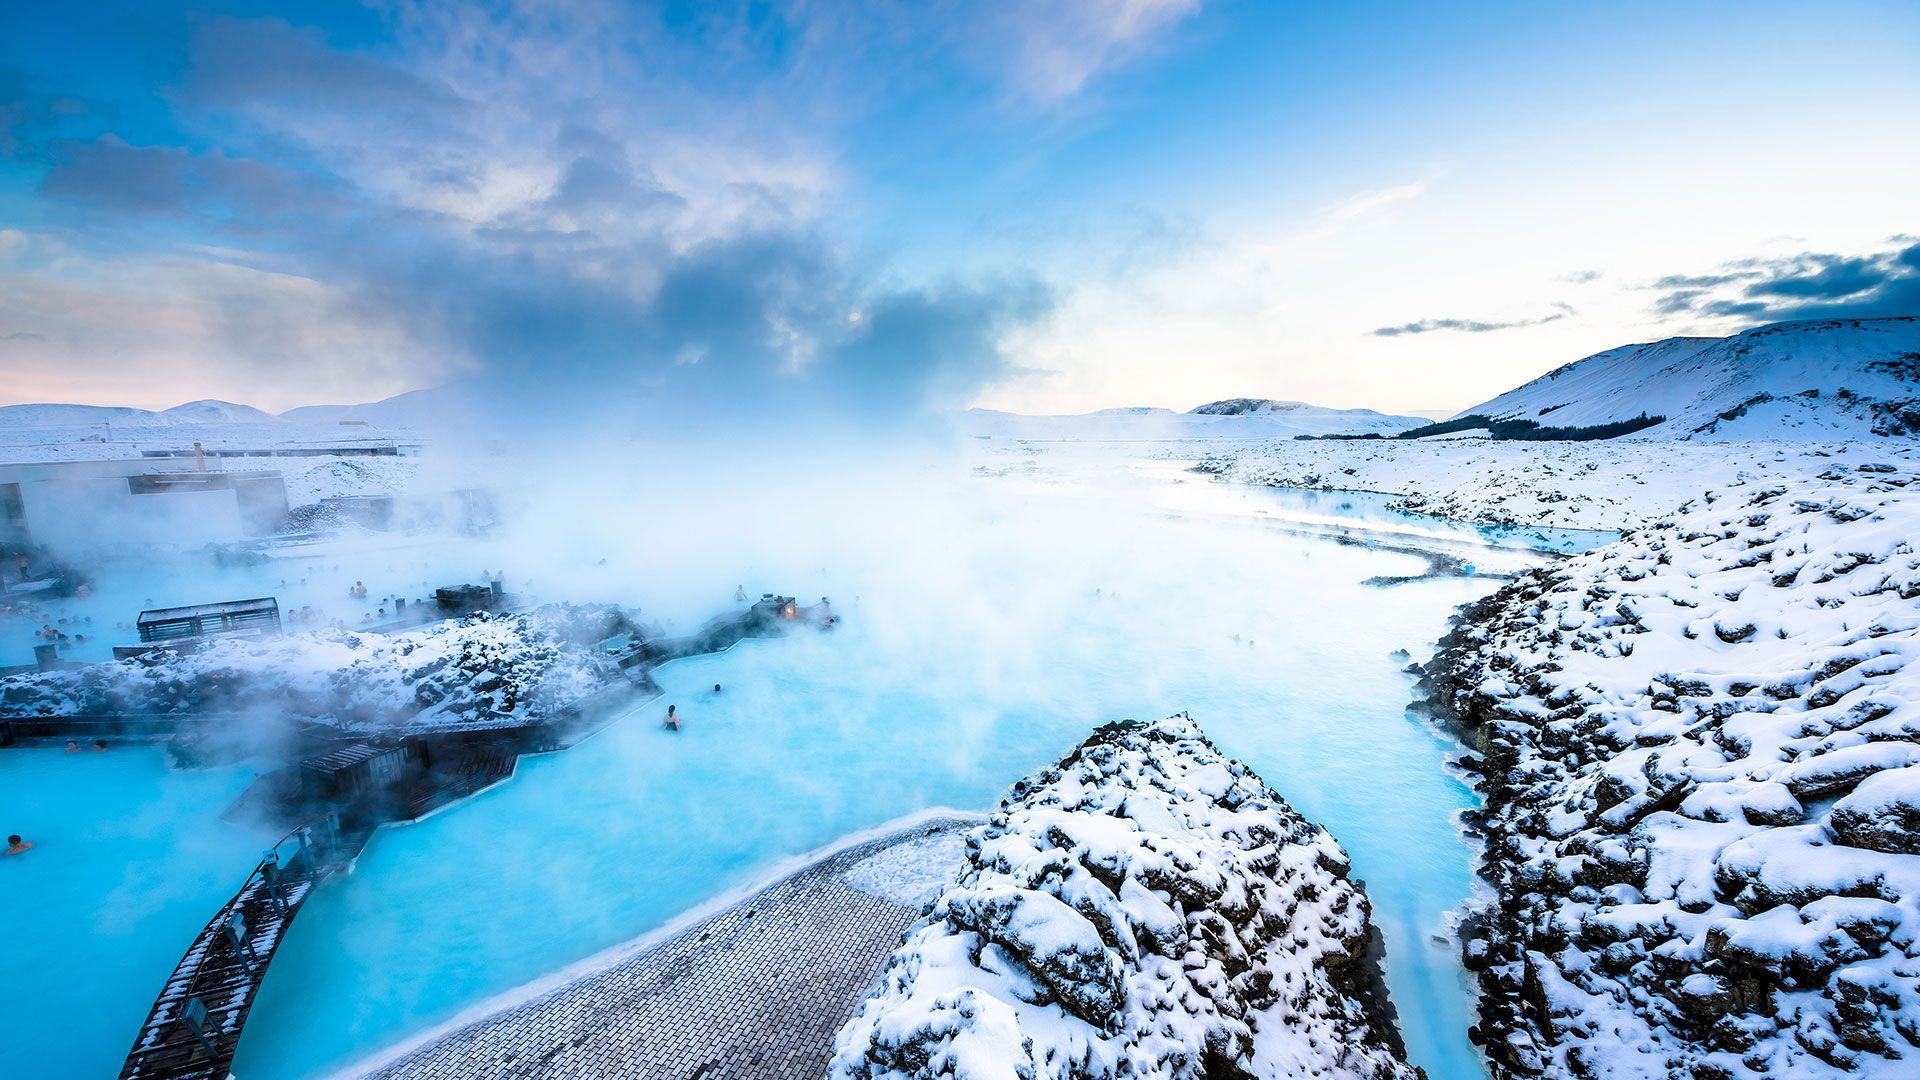 Blue Lagoon Wallpapers High Quality